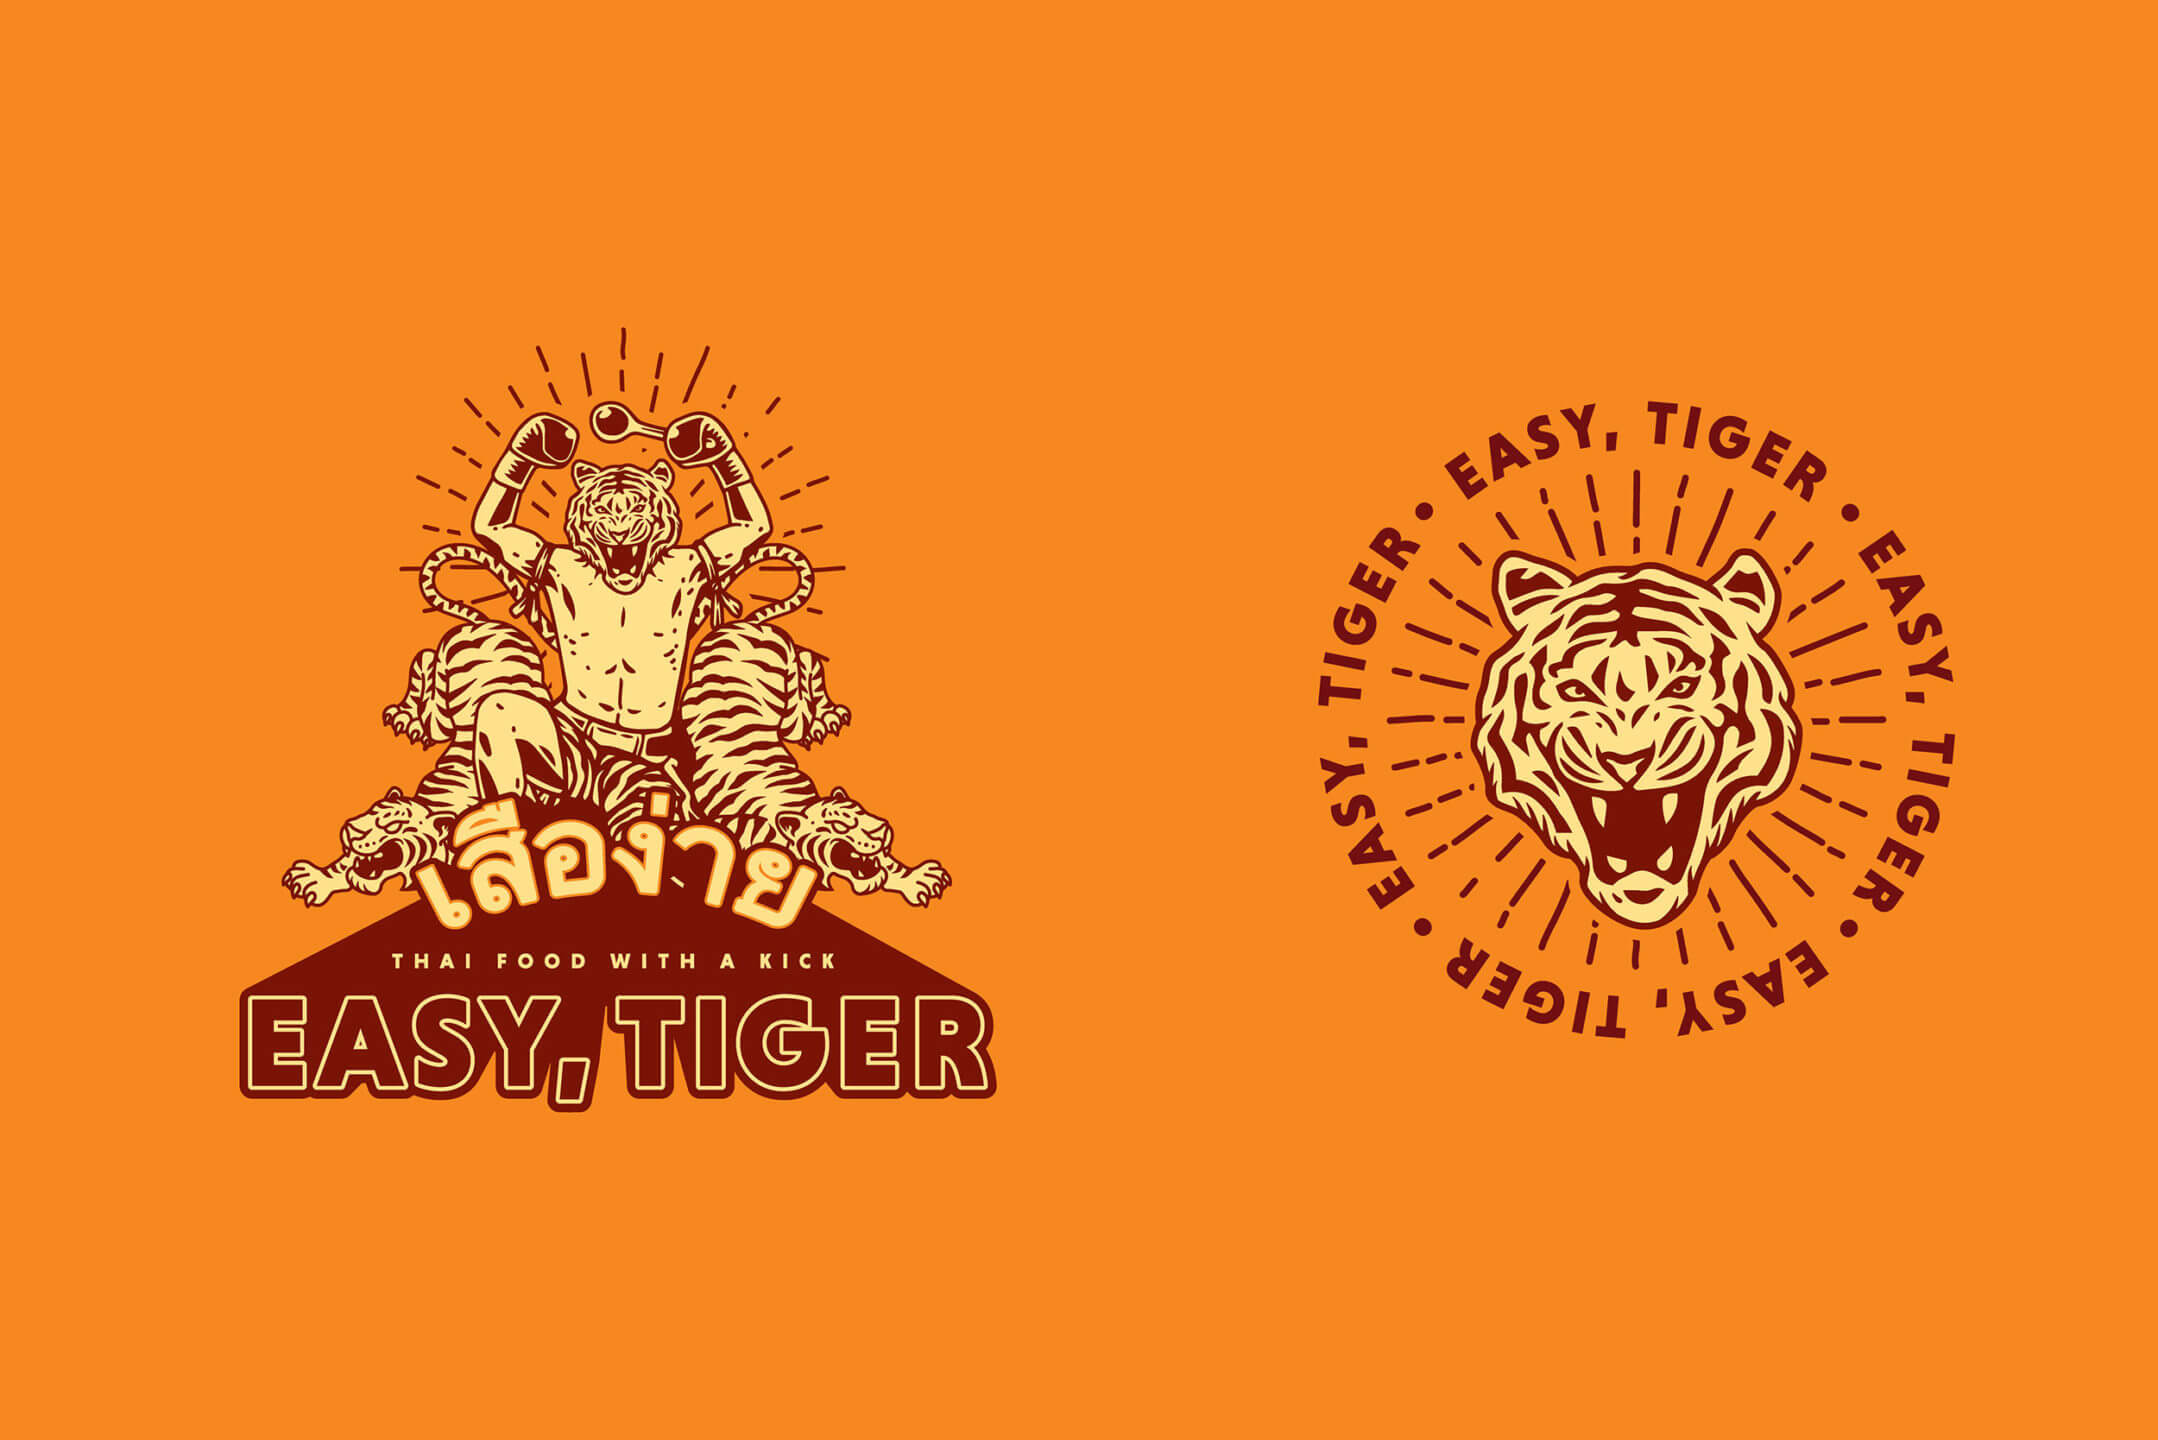 Logo lockups and seals featuring tiger illustrations for Thai food and beverage brand Easy Tiger